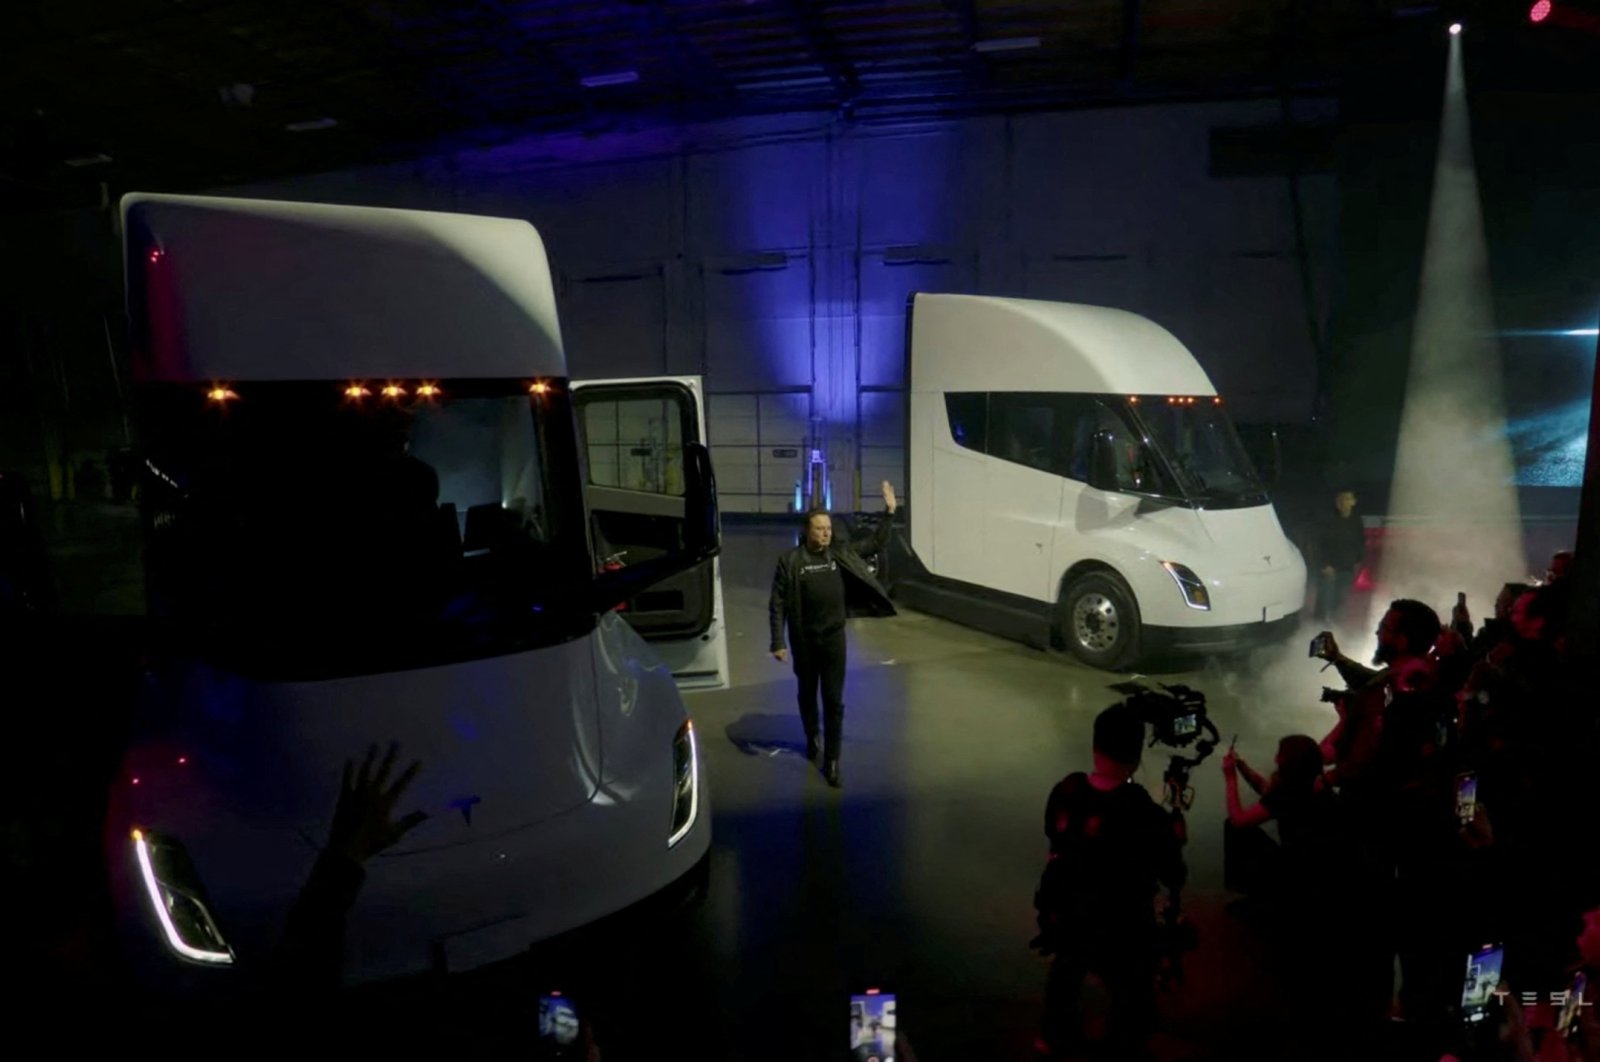 Tesla Chief Executive Elon Musk waves near Tesla Semi electric trucks during a live-streamed unveiling in Nevada, U.S. Dec. 1, 2022, in this still image taken from video. (Tesla Handout via REUTERS)